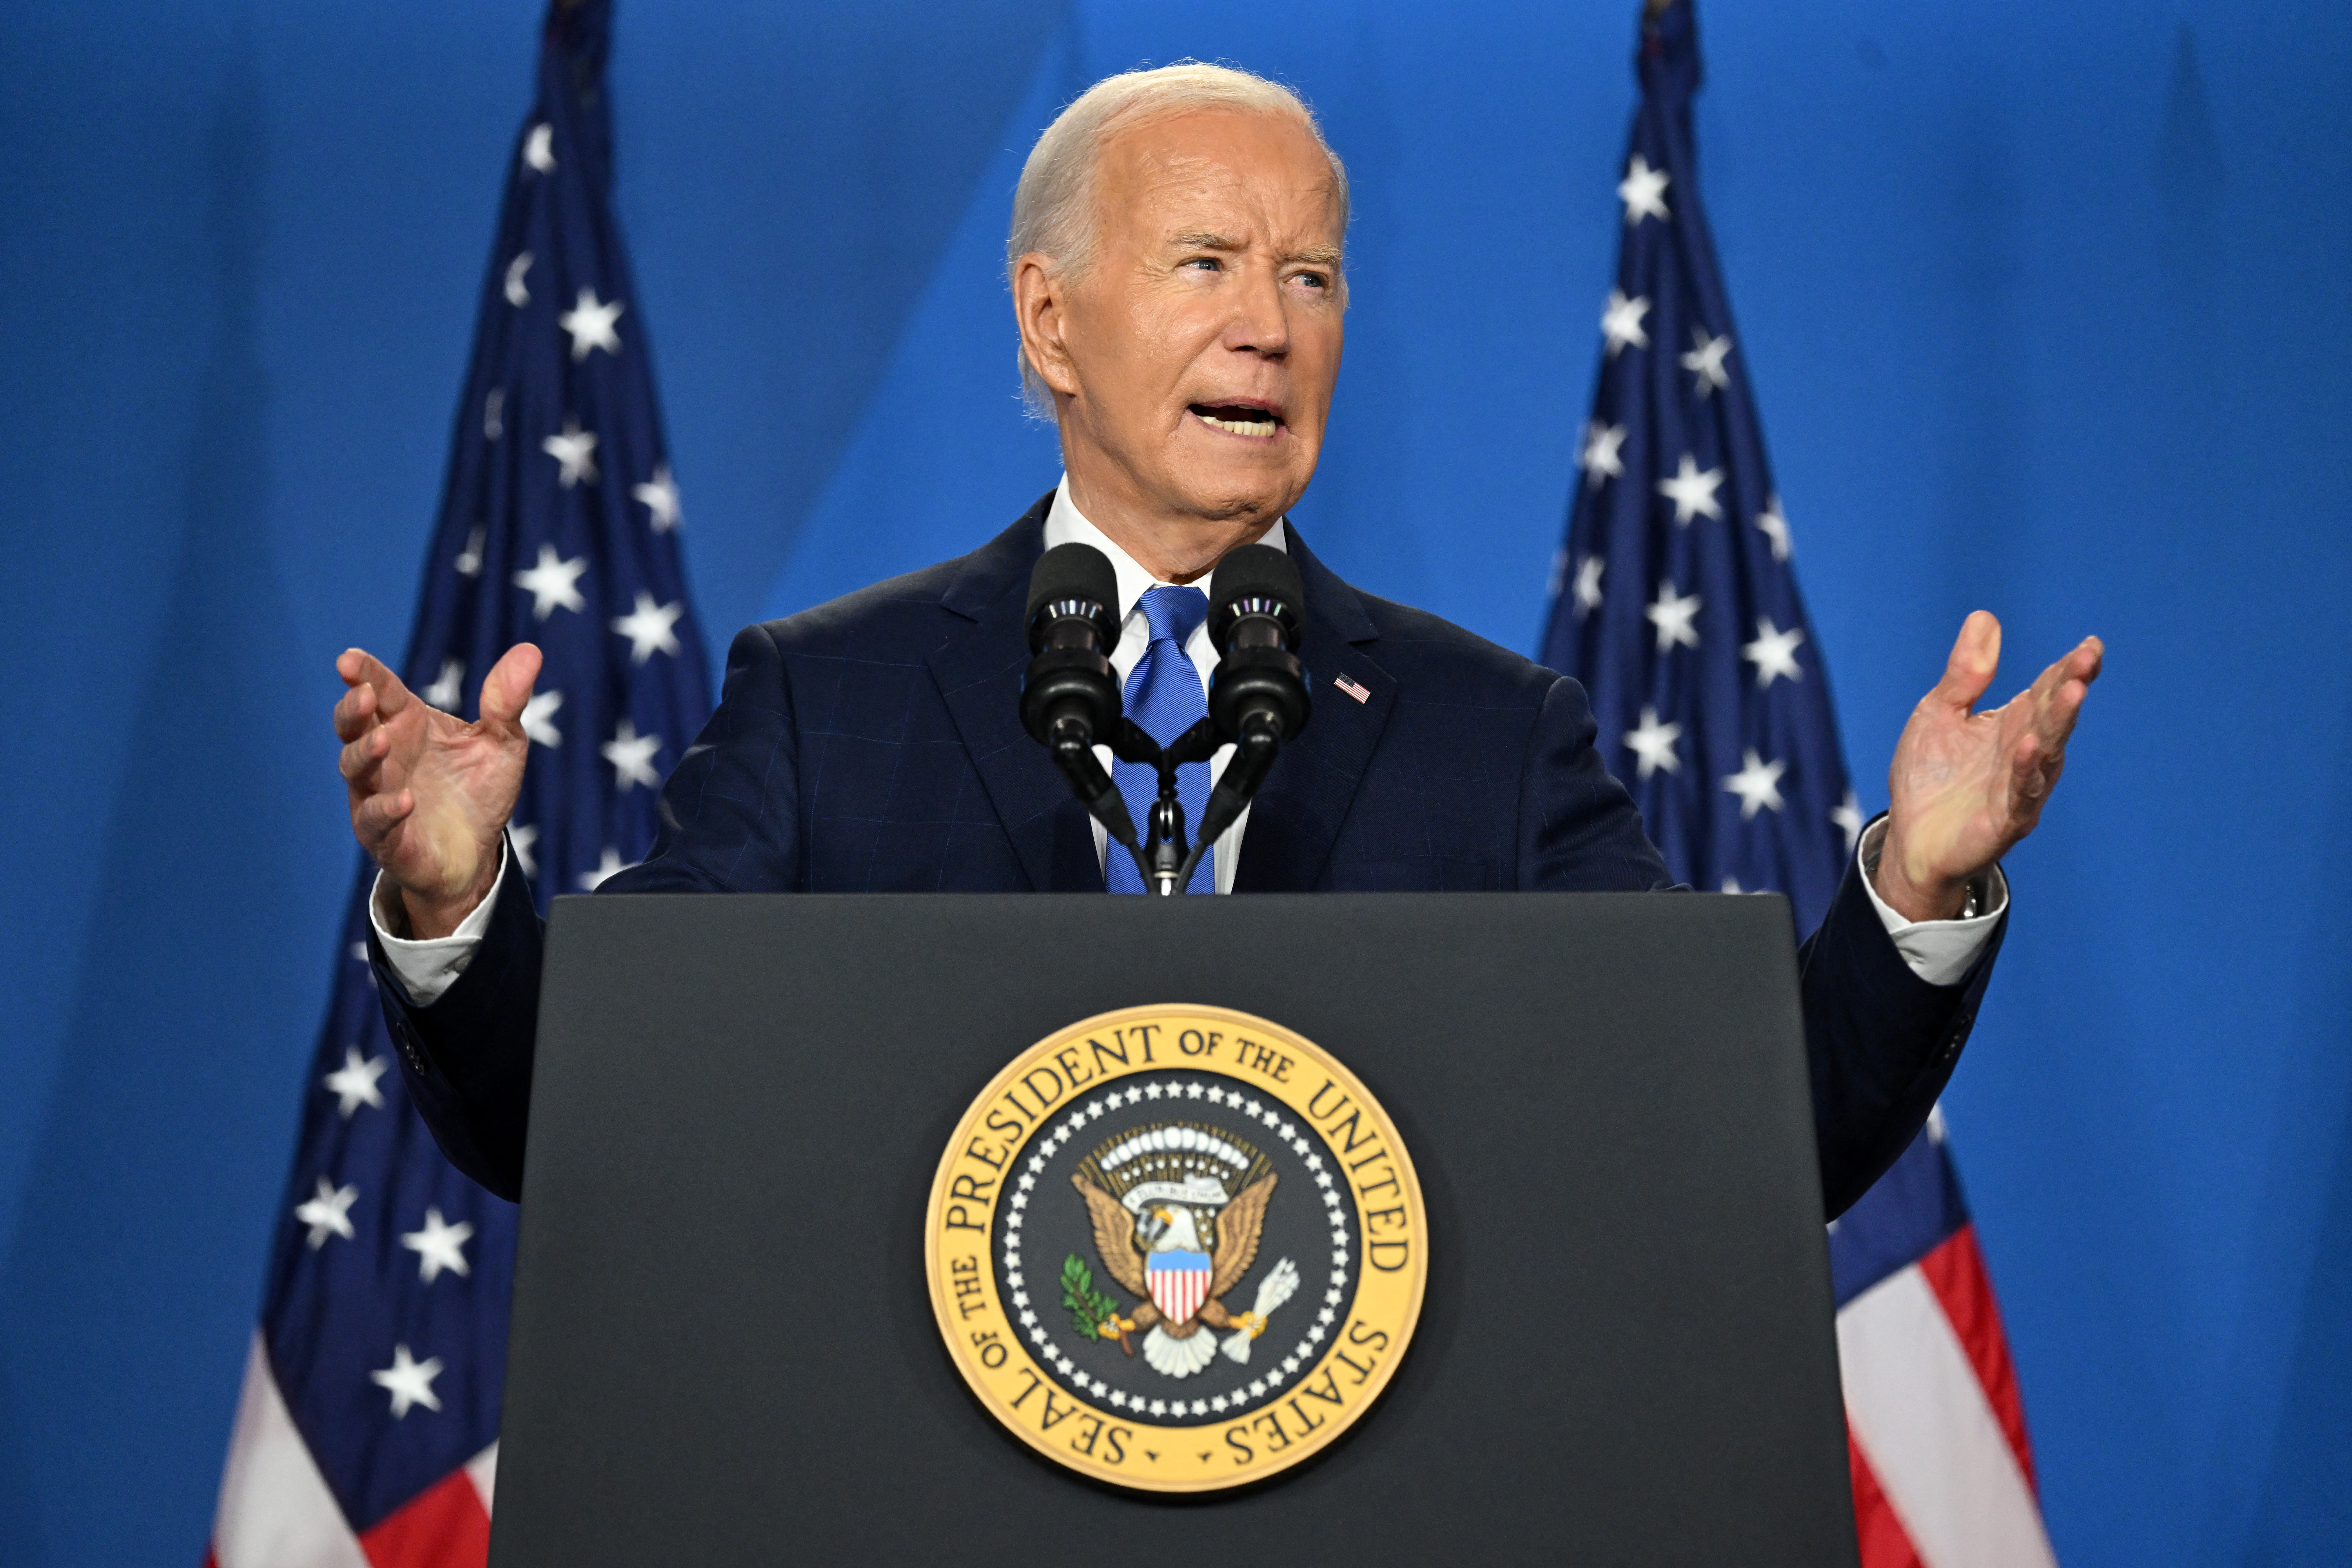 Joe Biden Will Still Do Sit-Down Interview With NBC News’ Lester Holt, But It Will Be From The White House